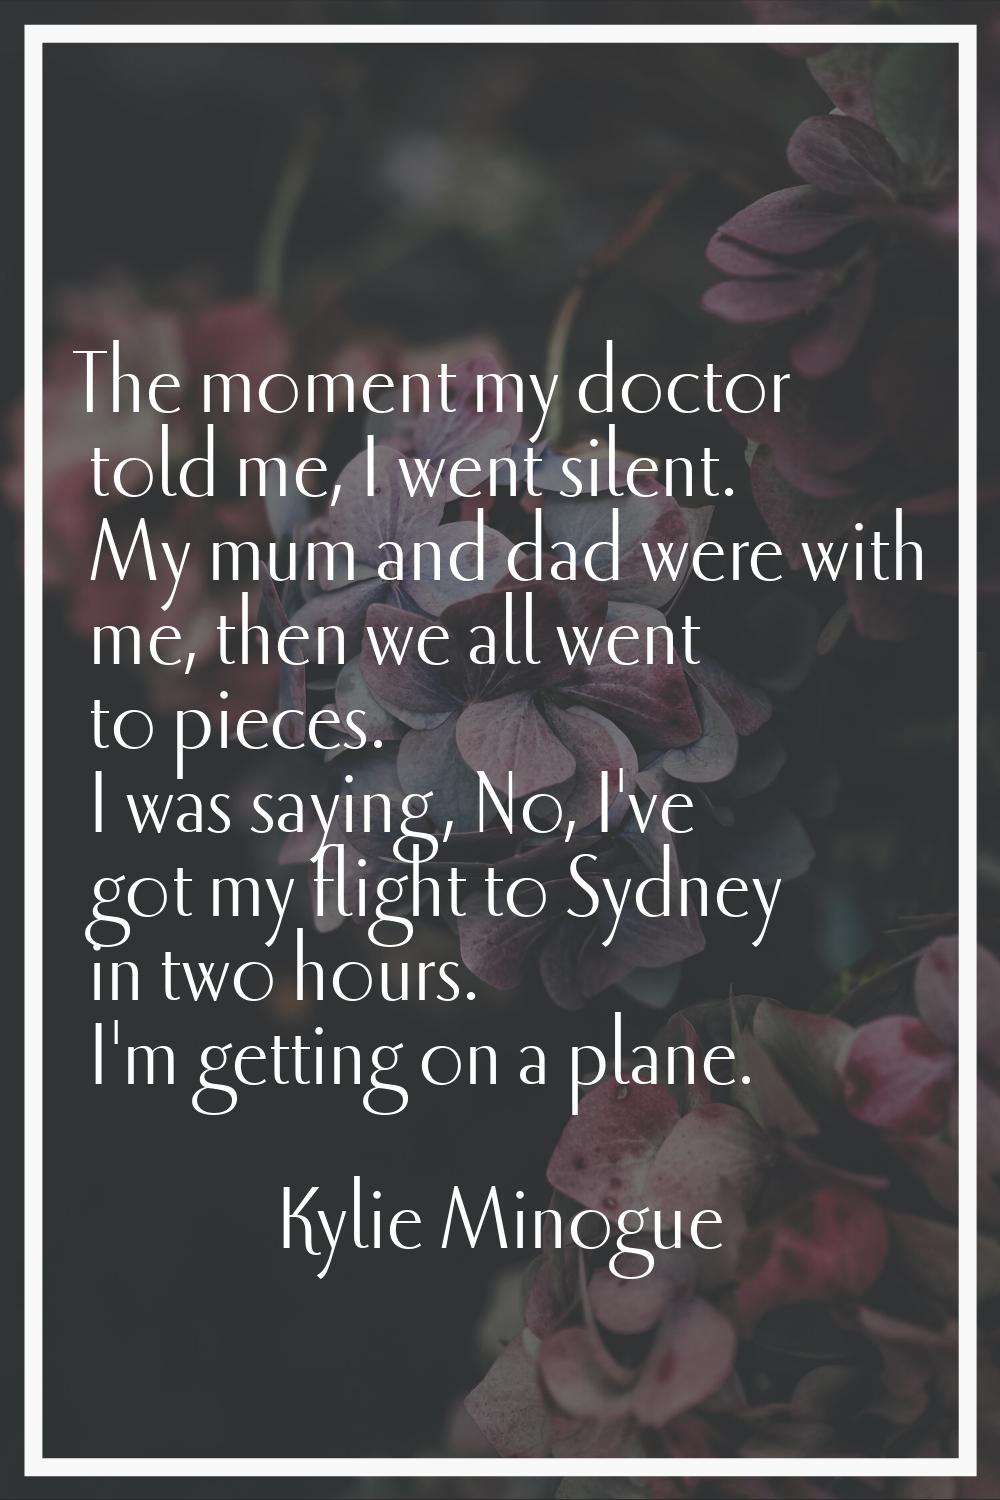 The moment my doctor told me, I went silent. My mum and dad were with me, then we all went to piece